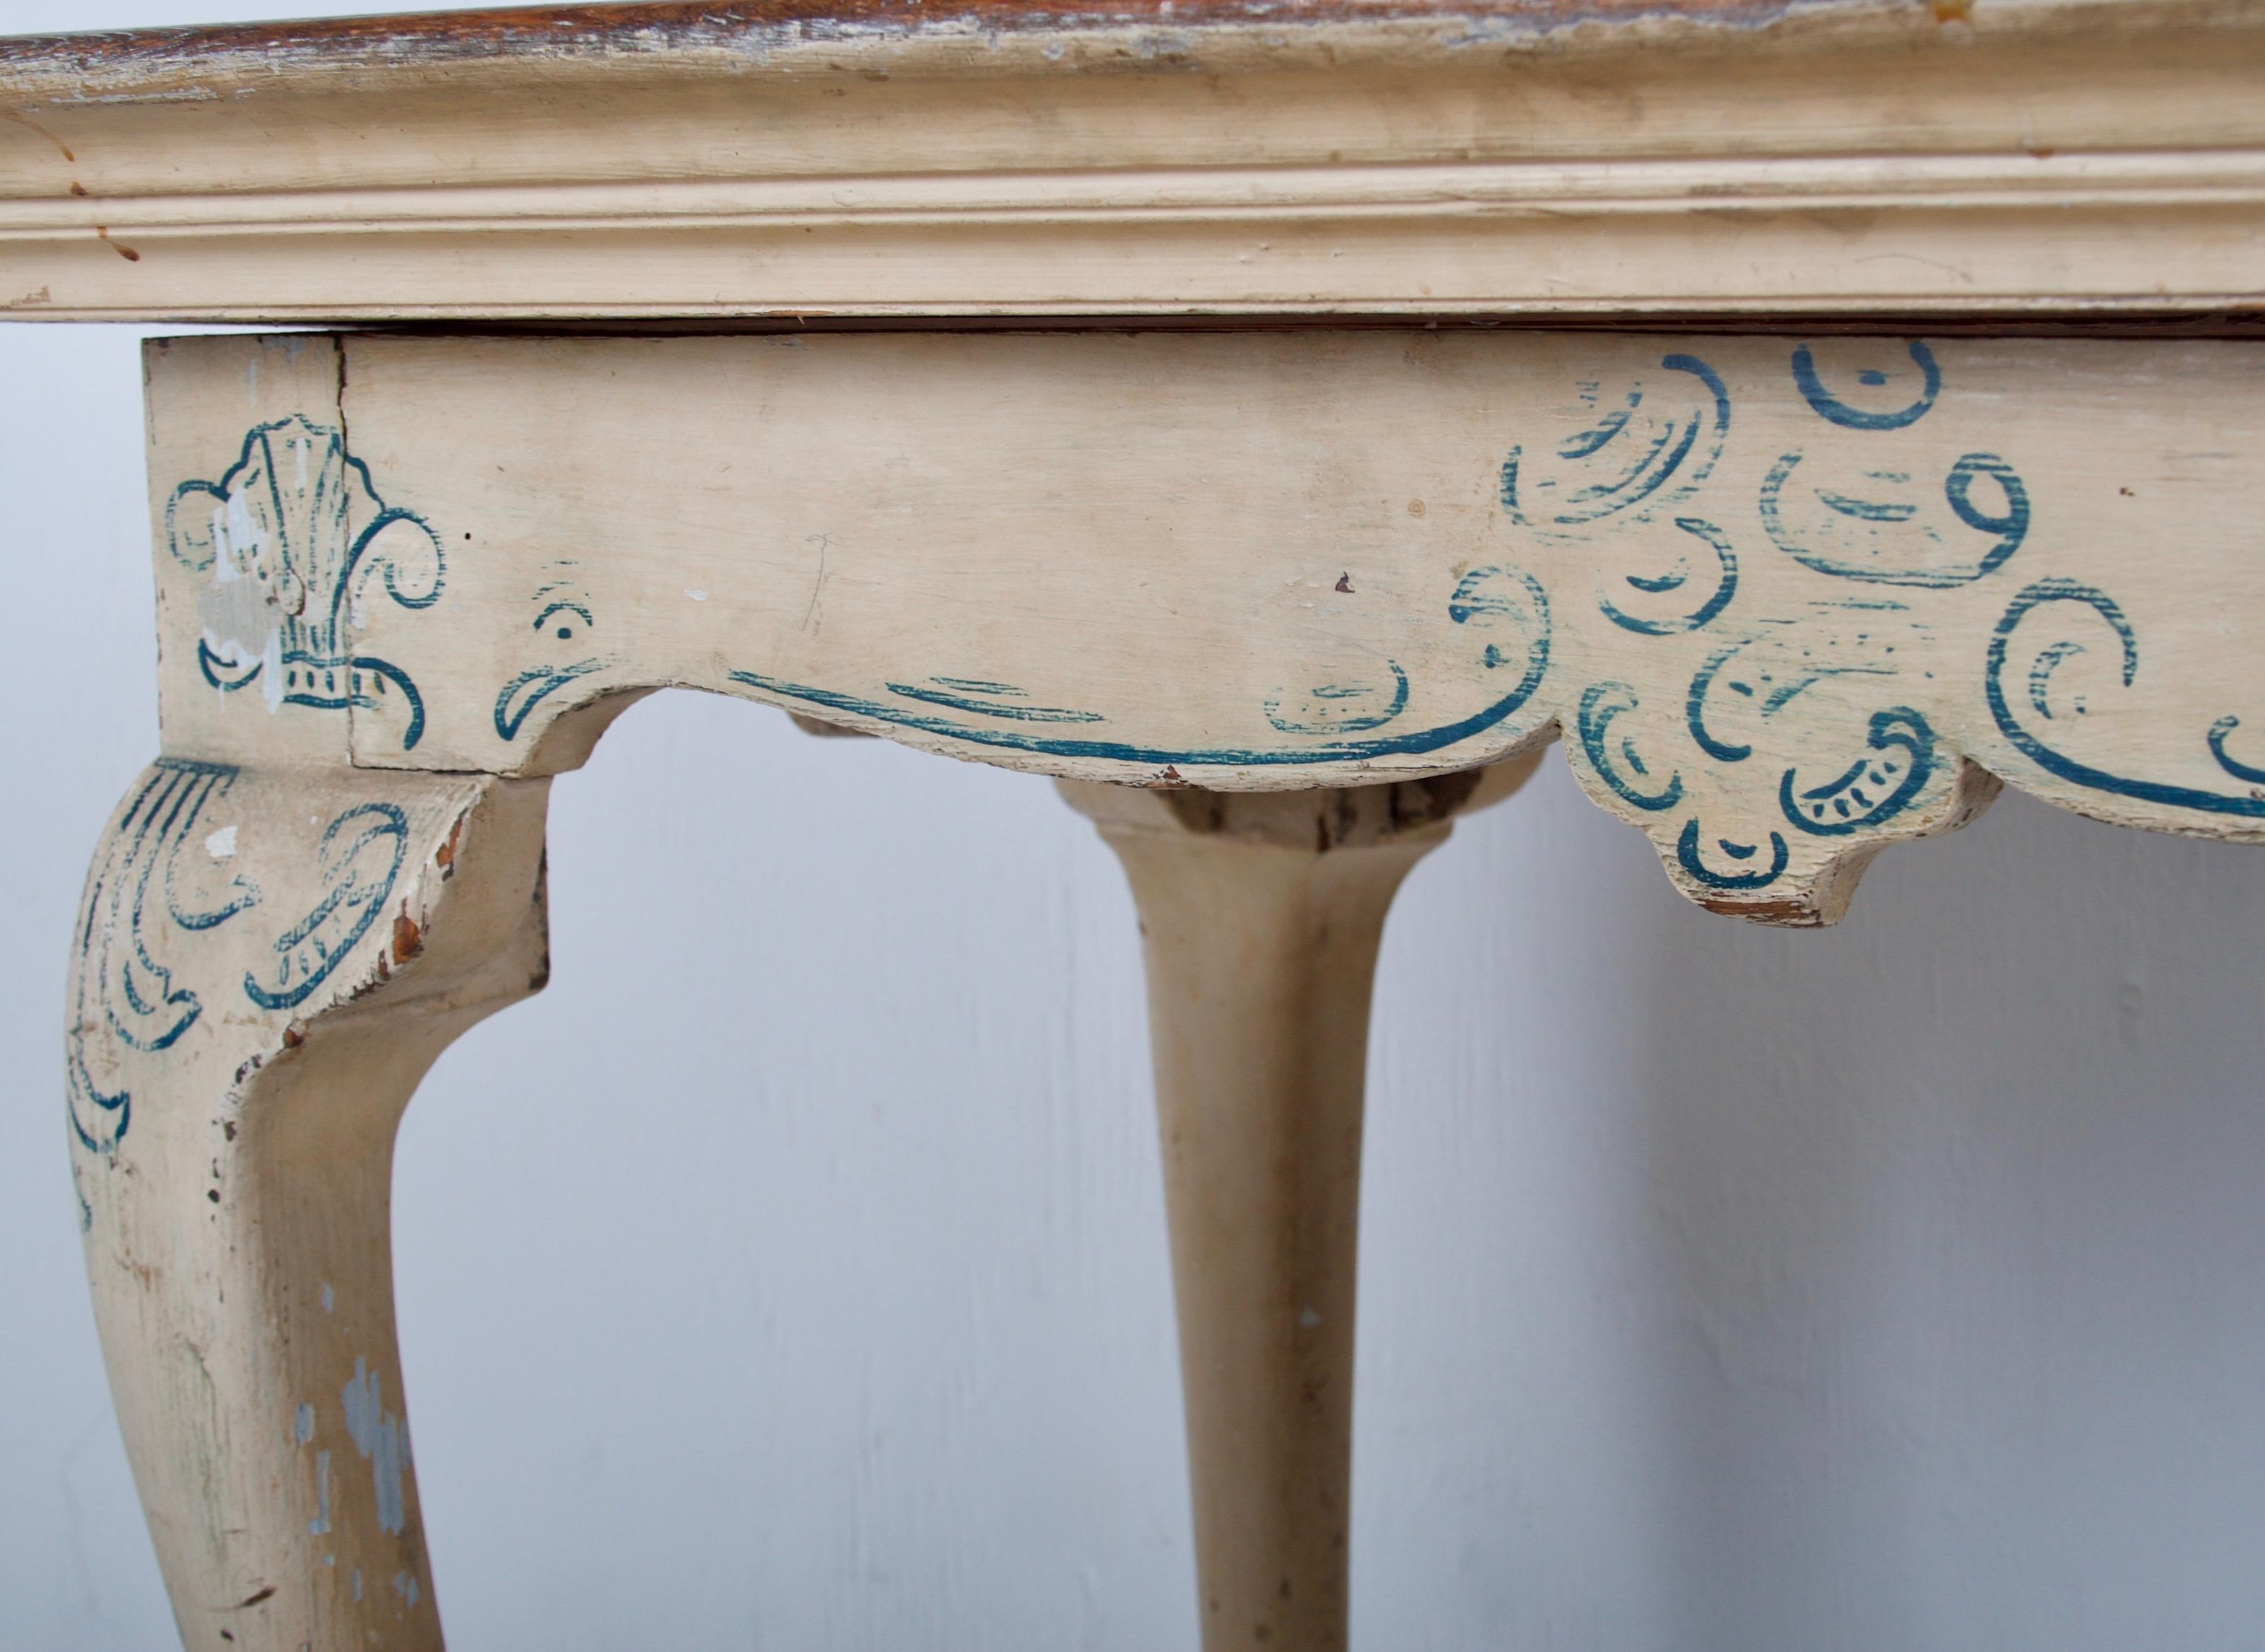 Hand-Painted 17th Cent. Delft Tile Inset into a 18th Cent. Dutch Side Table with Paint Decor